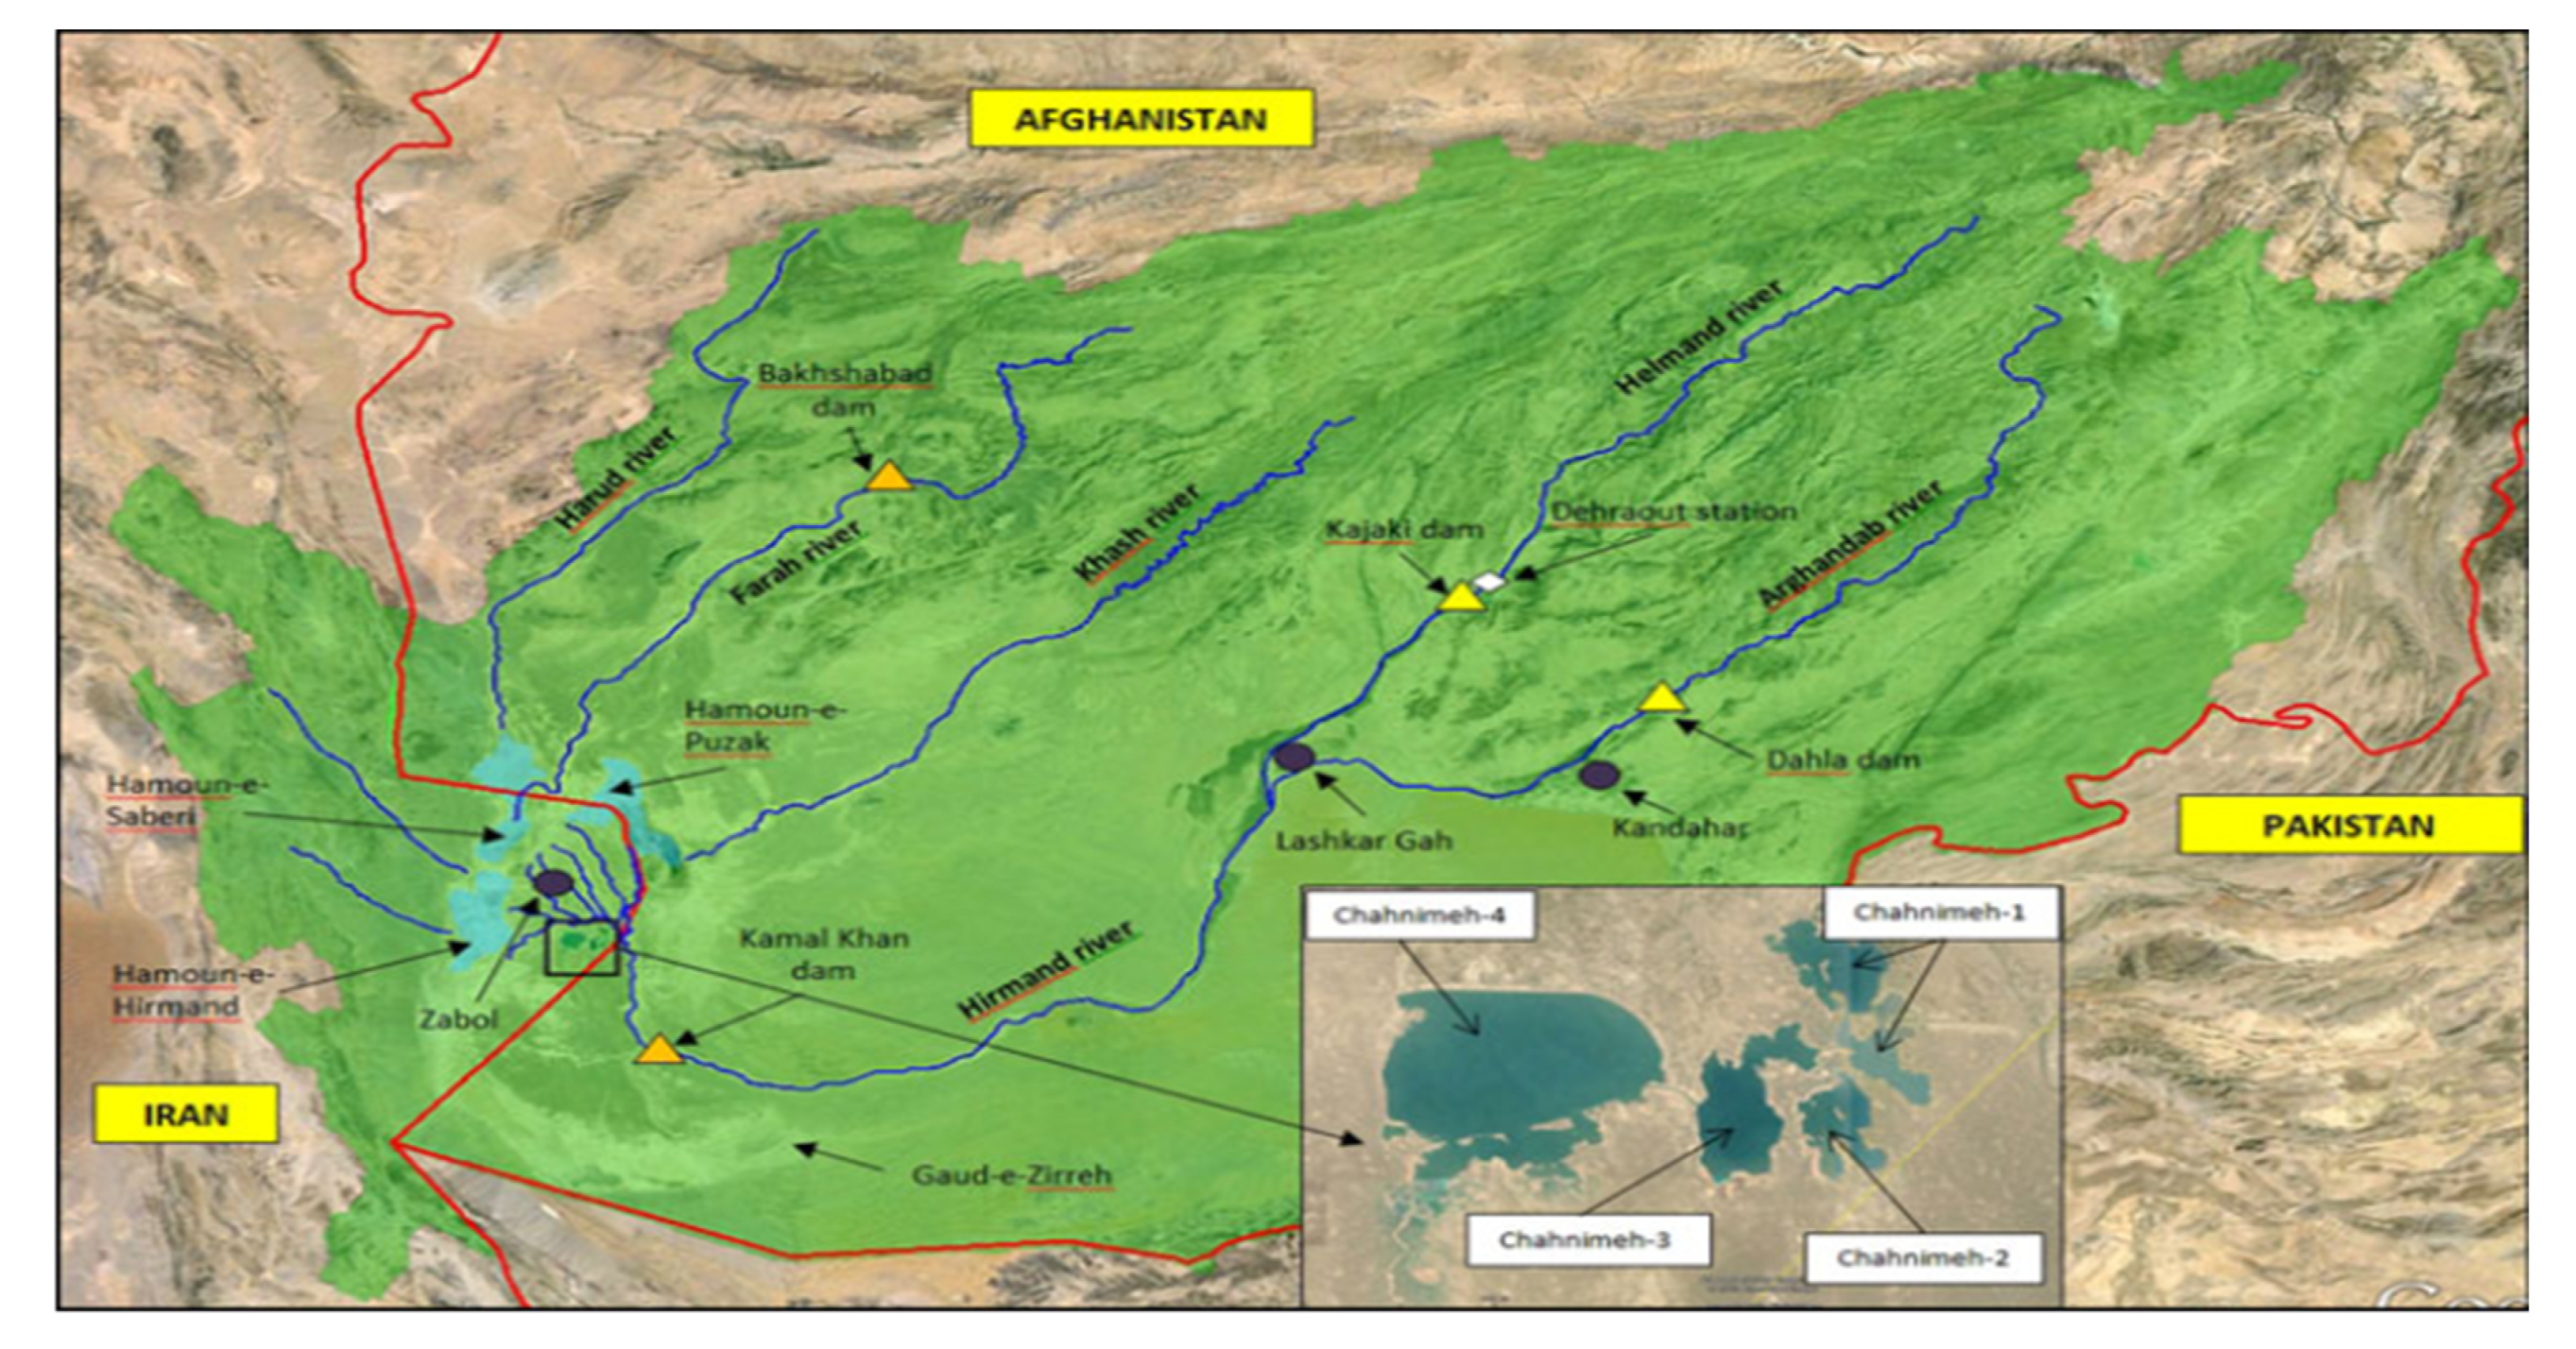 helmand river map